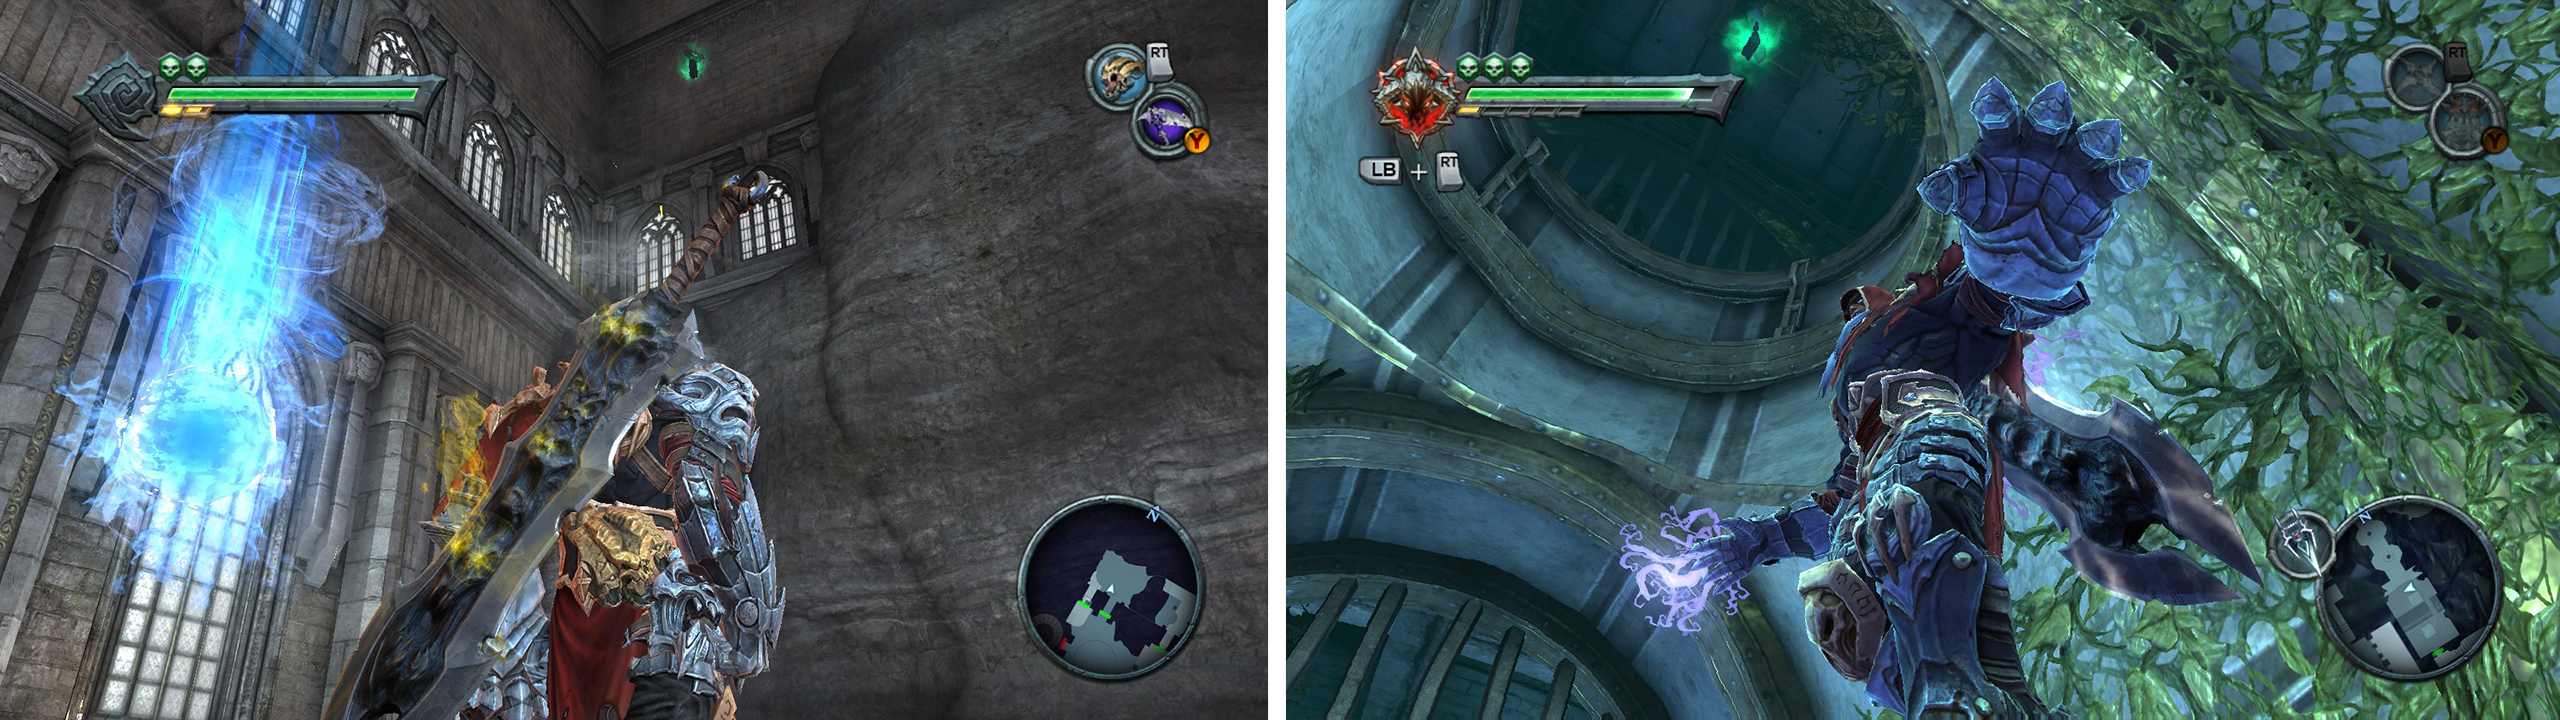 Twilight Cathedral: after blowing up a red crystal Use the shadowflight geyser to reach the Artefact (left). The Hollows: return through the room that is now filled with water after grabbing the third Beholders Key, swim into the pipe below the surface to find an Artefact (right).